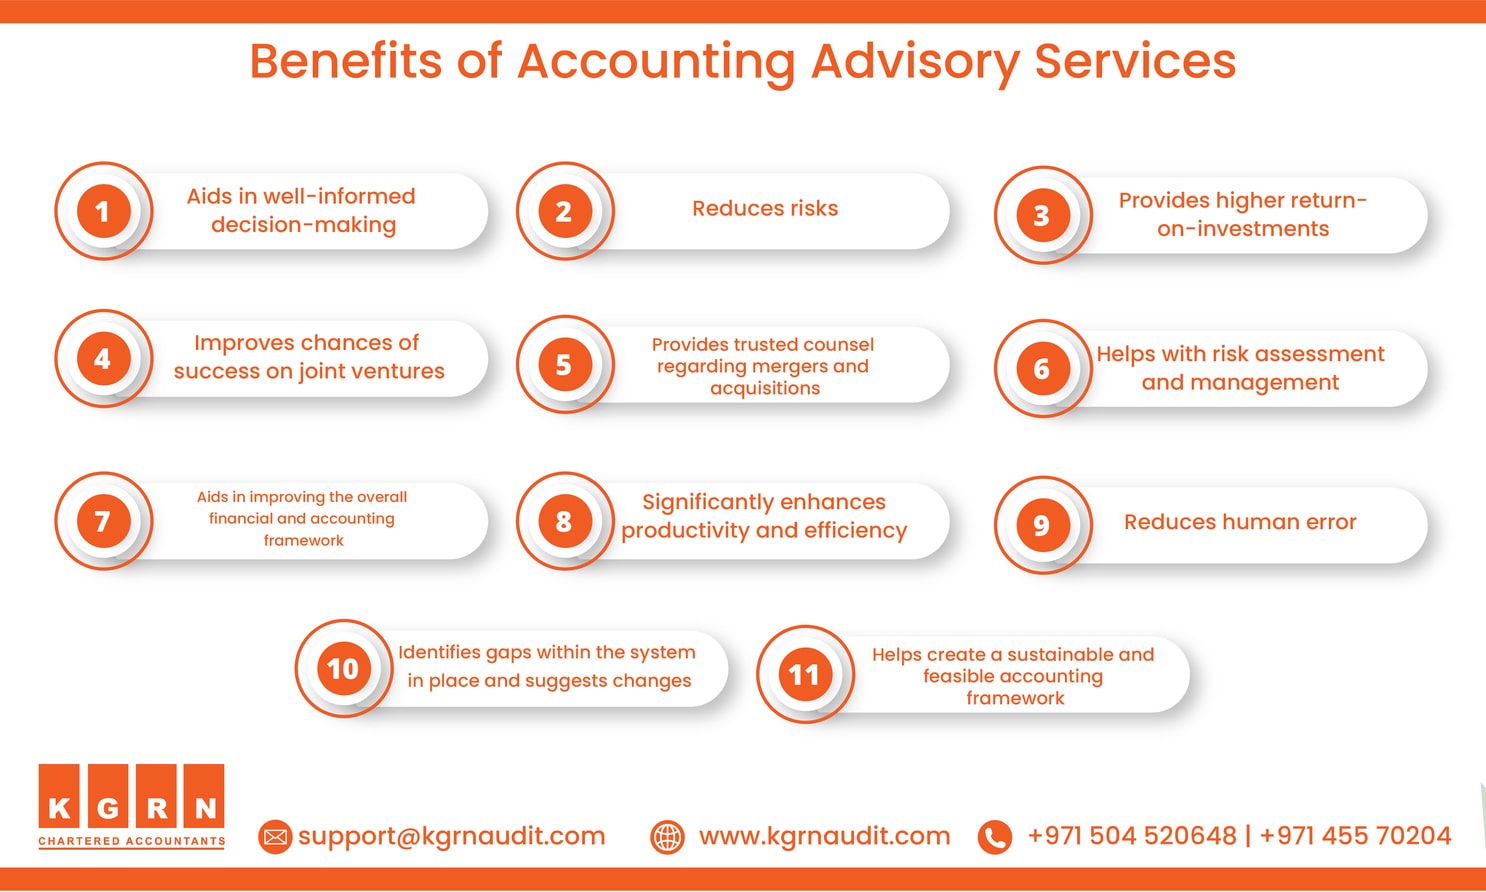 Benefits of Accounting Advisory Services in UAE